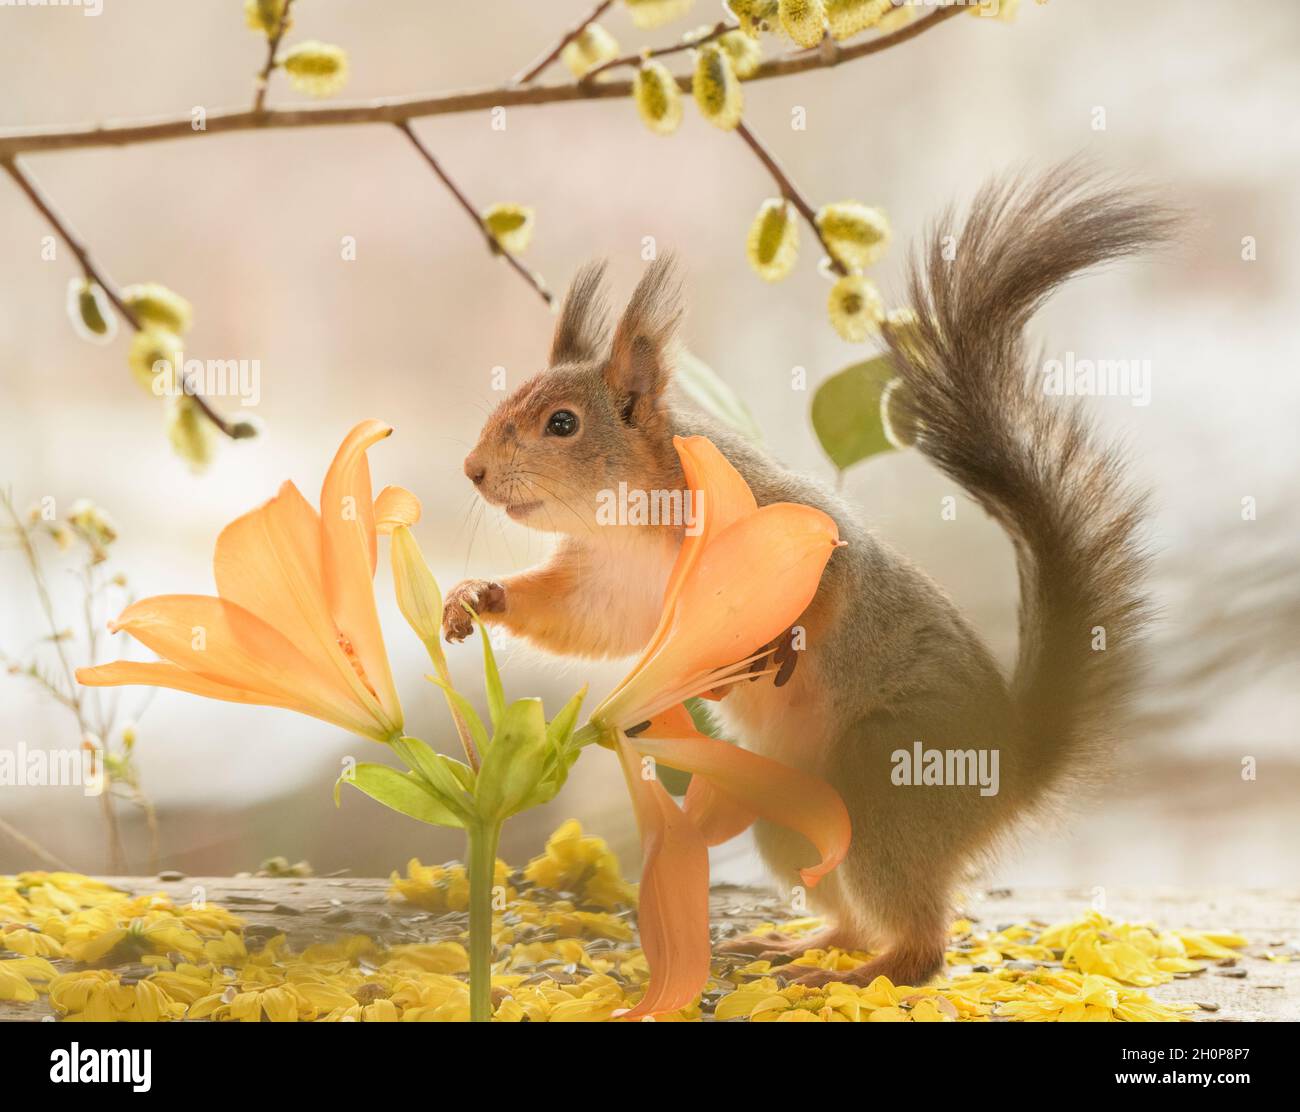 Red squirrel is standing behind orange lilies Stock Photo